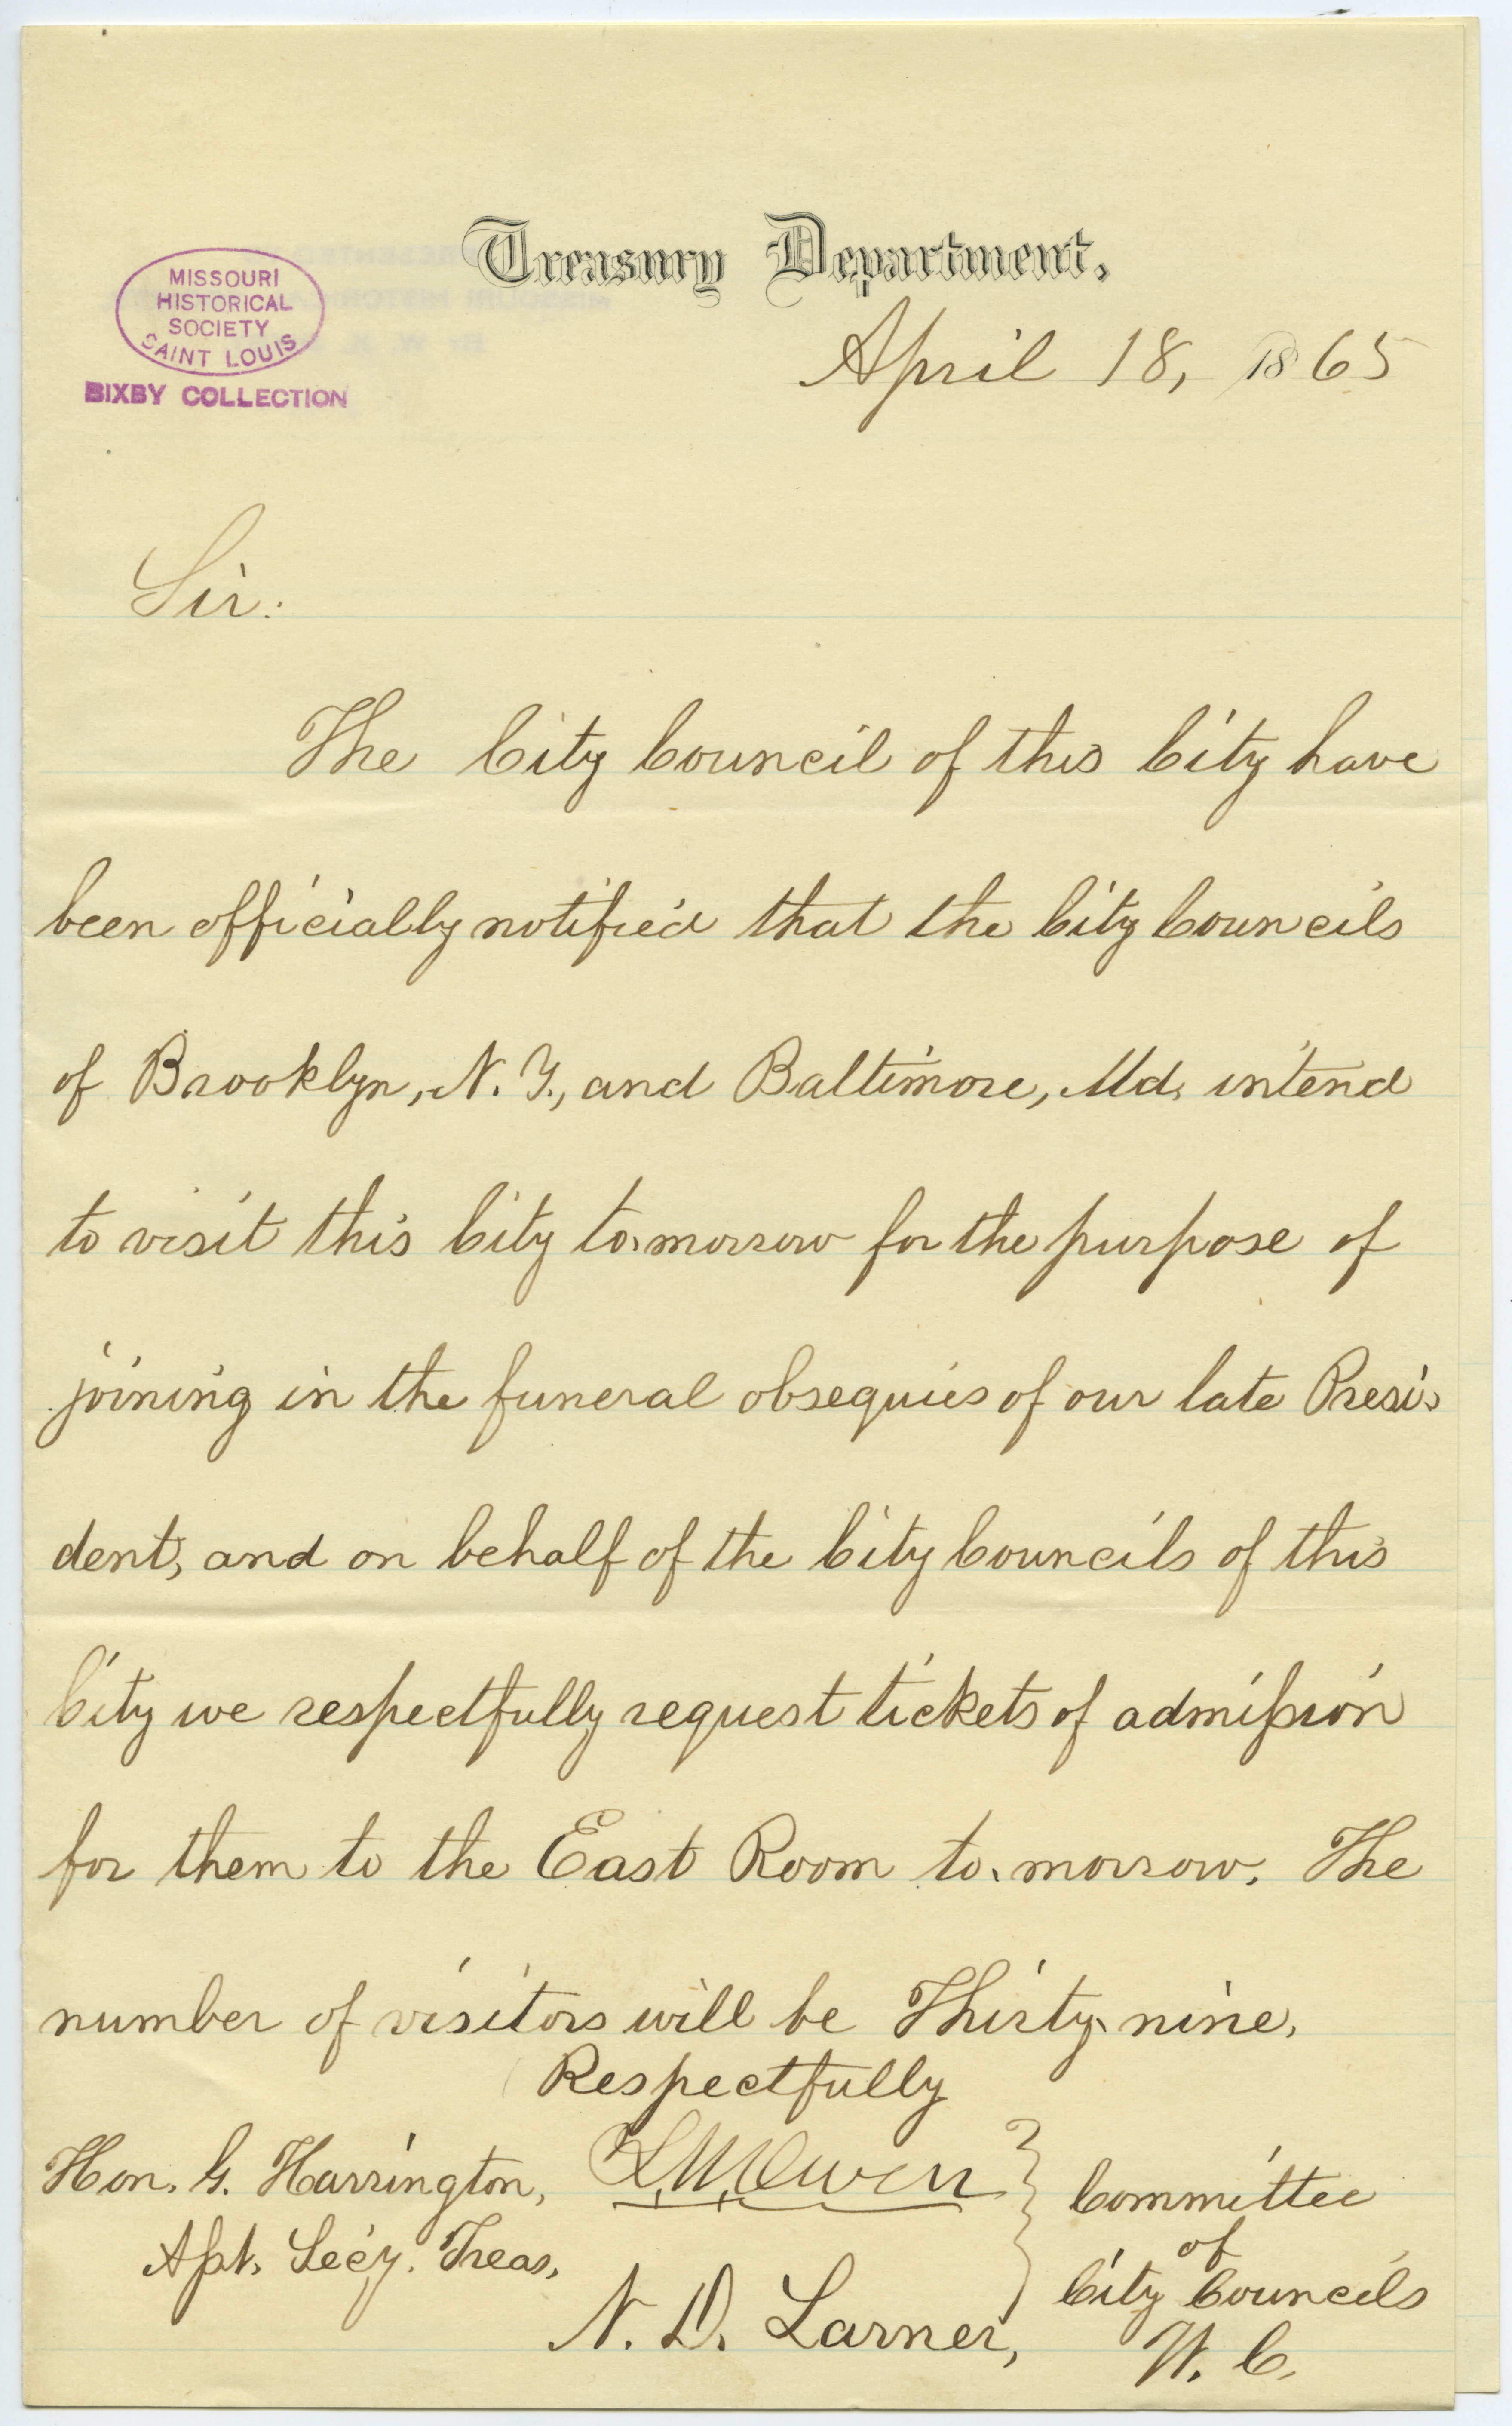 Letter signed L.W. Owen and N.D. Larner, Committee of City Councils, Treasury Department, to Hon. G. Harrington, Asst. Sec'y. Treas., April 18, 1865